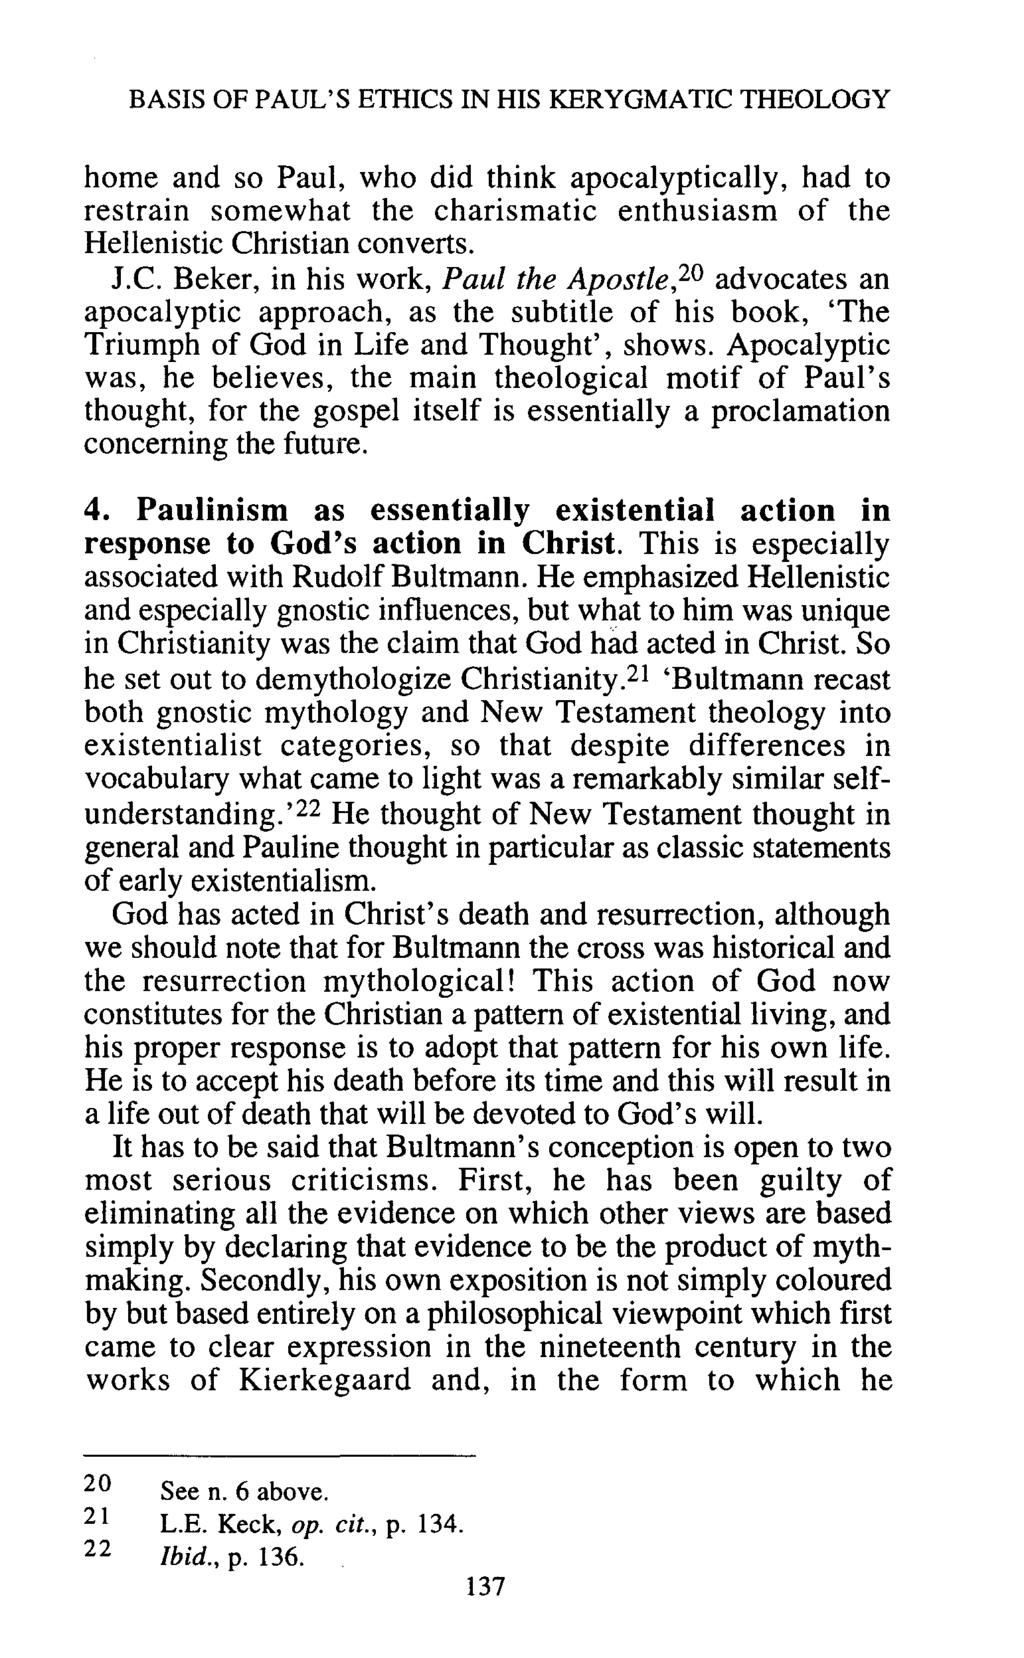 BASIS OF PAUL'S ETHICS IN HIS KERYGMATIC THEOLOGY home and so Paul, who did think apocalyptically, had to restrain somewhat the charismatic enthusiasm of the Hellenistic Christian converts. J.C. Beker, in his work, Paul the Apostle,20 advocates an apocalyptic approach, as the subtitle of his book, 'The Triumph of God in Life and Thought', shows.